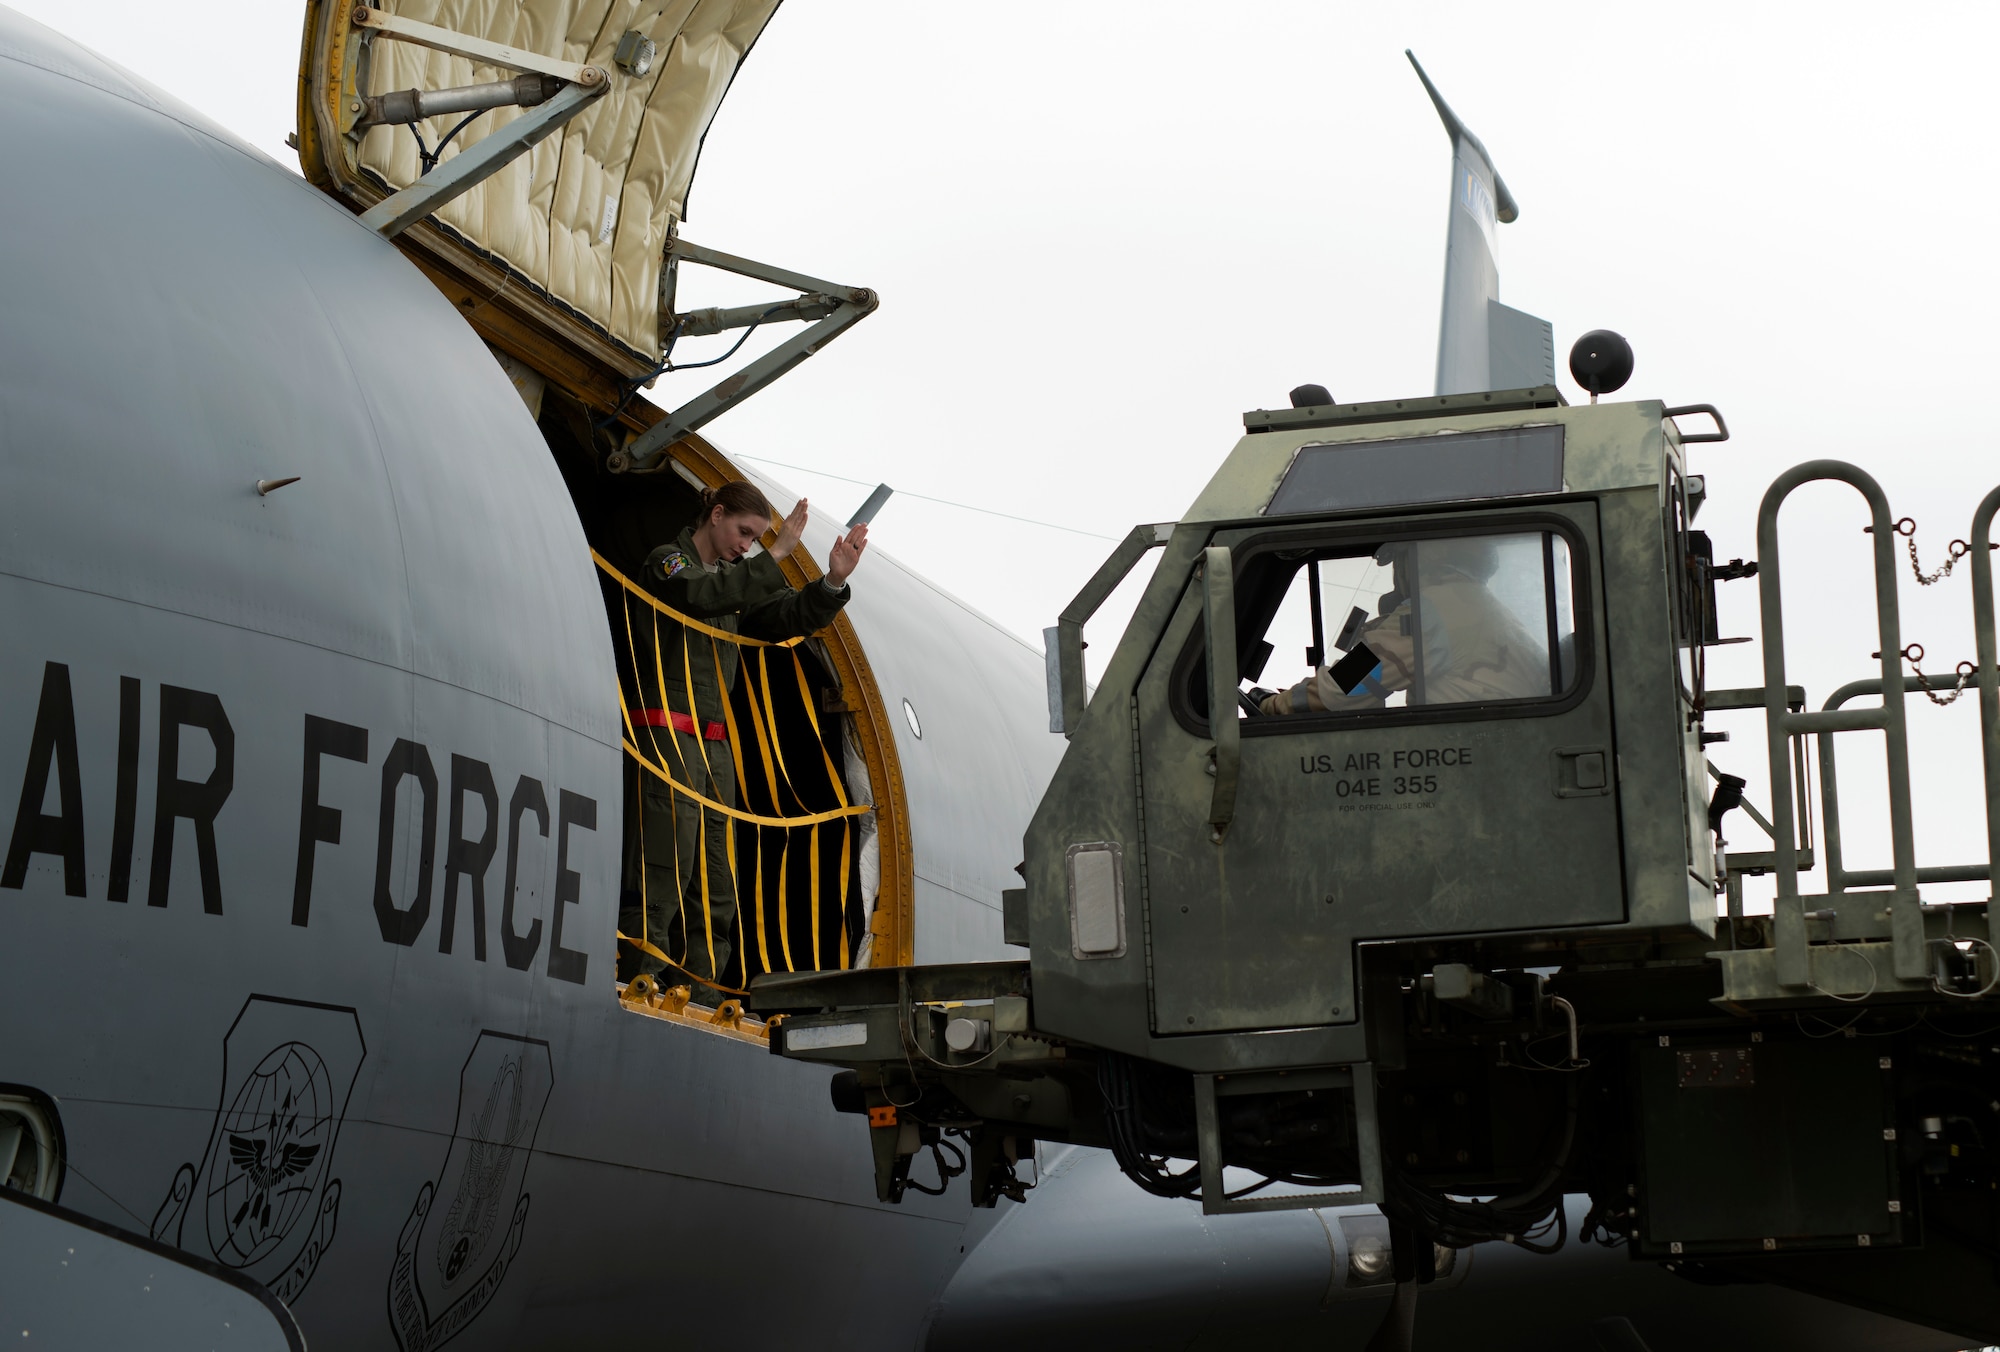 U.S. Air Force Airman 1st Class Douglas Boehm, right, a passenger service representative assigned to the 6th Logistics Readiness Squadron (LRS), raises a 25K halvorsen loader during a training exercise at MacDill Air Force Base, Fla., Feb. 14, 2018.